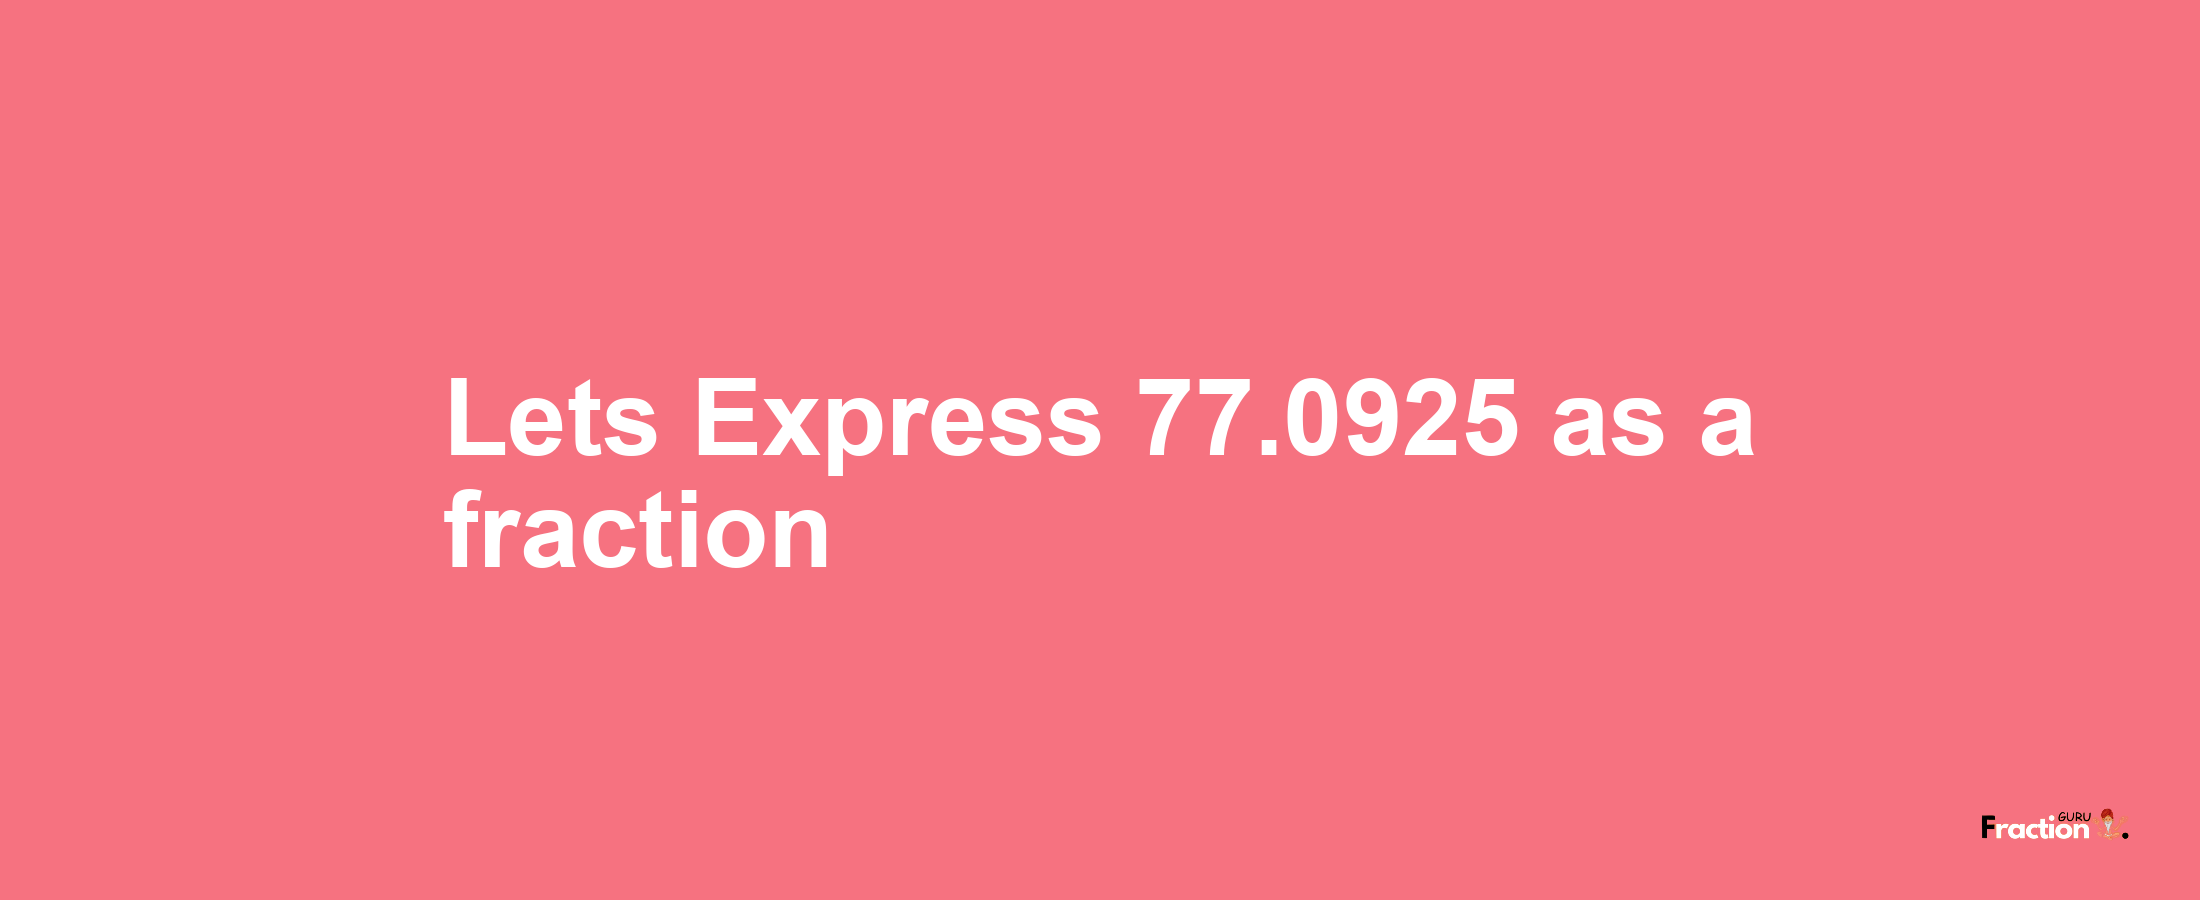 Lets Express 77.0925 as afraction